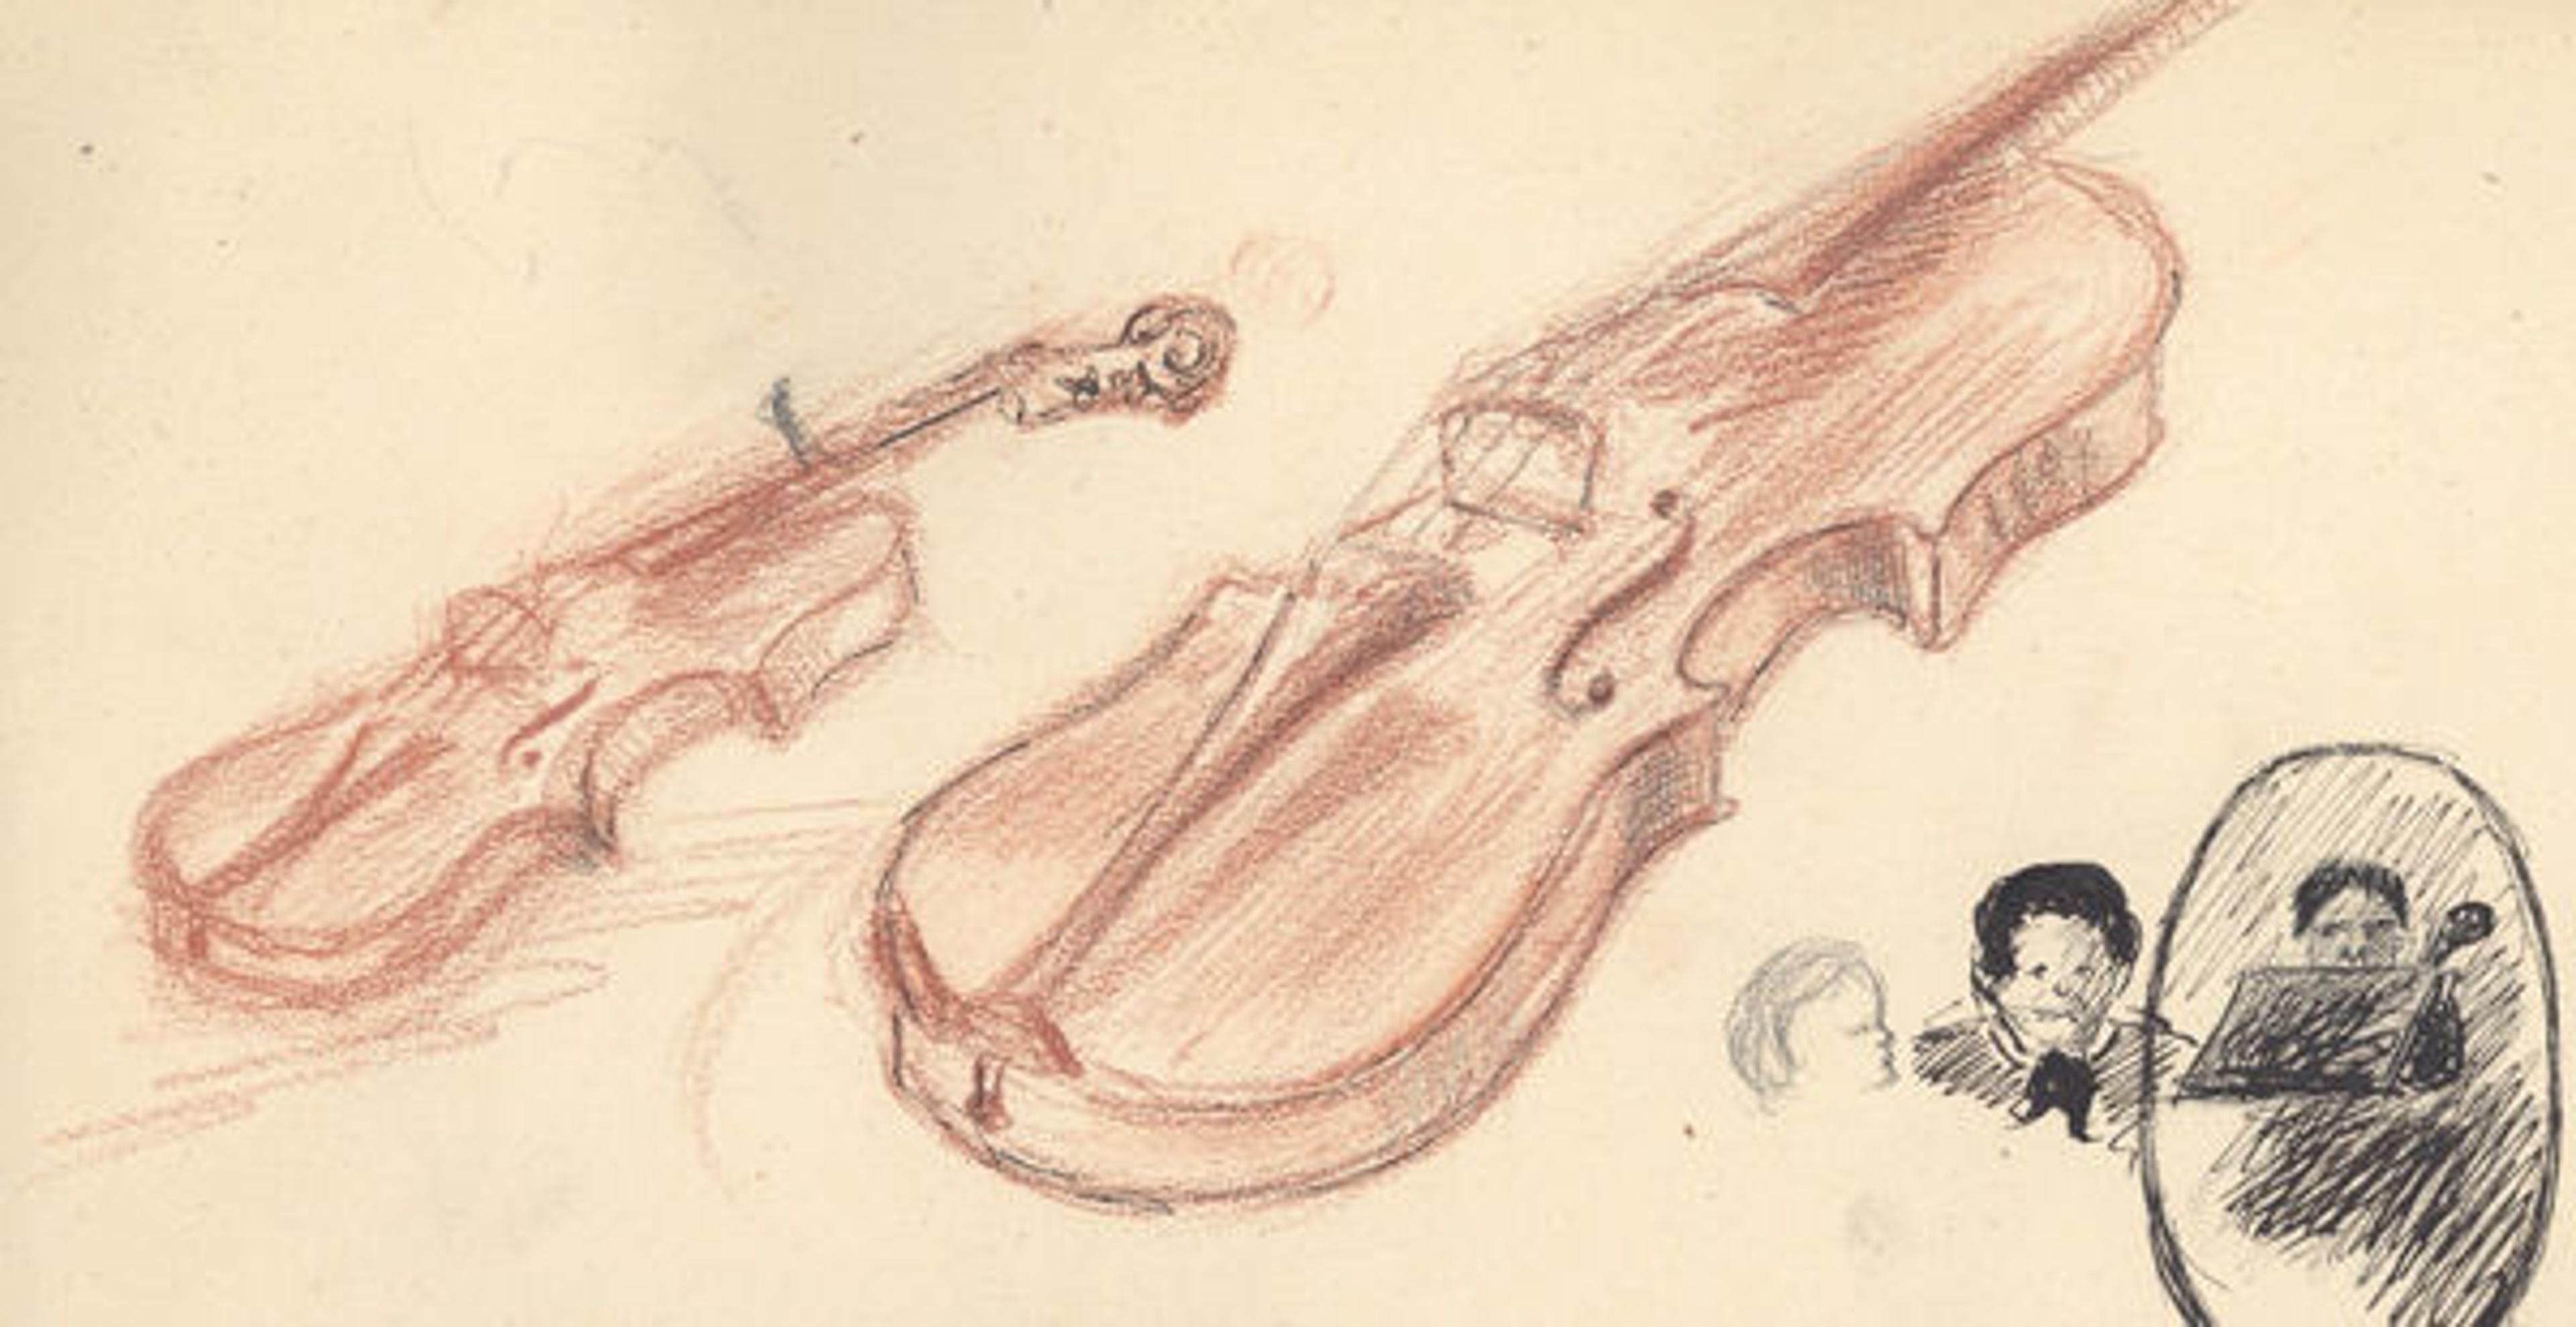 Winternitz showed his musical interests early. Above, a pastel of a violin, drawn when he was 16. 